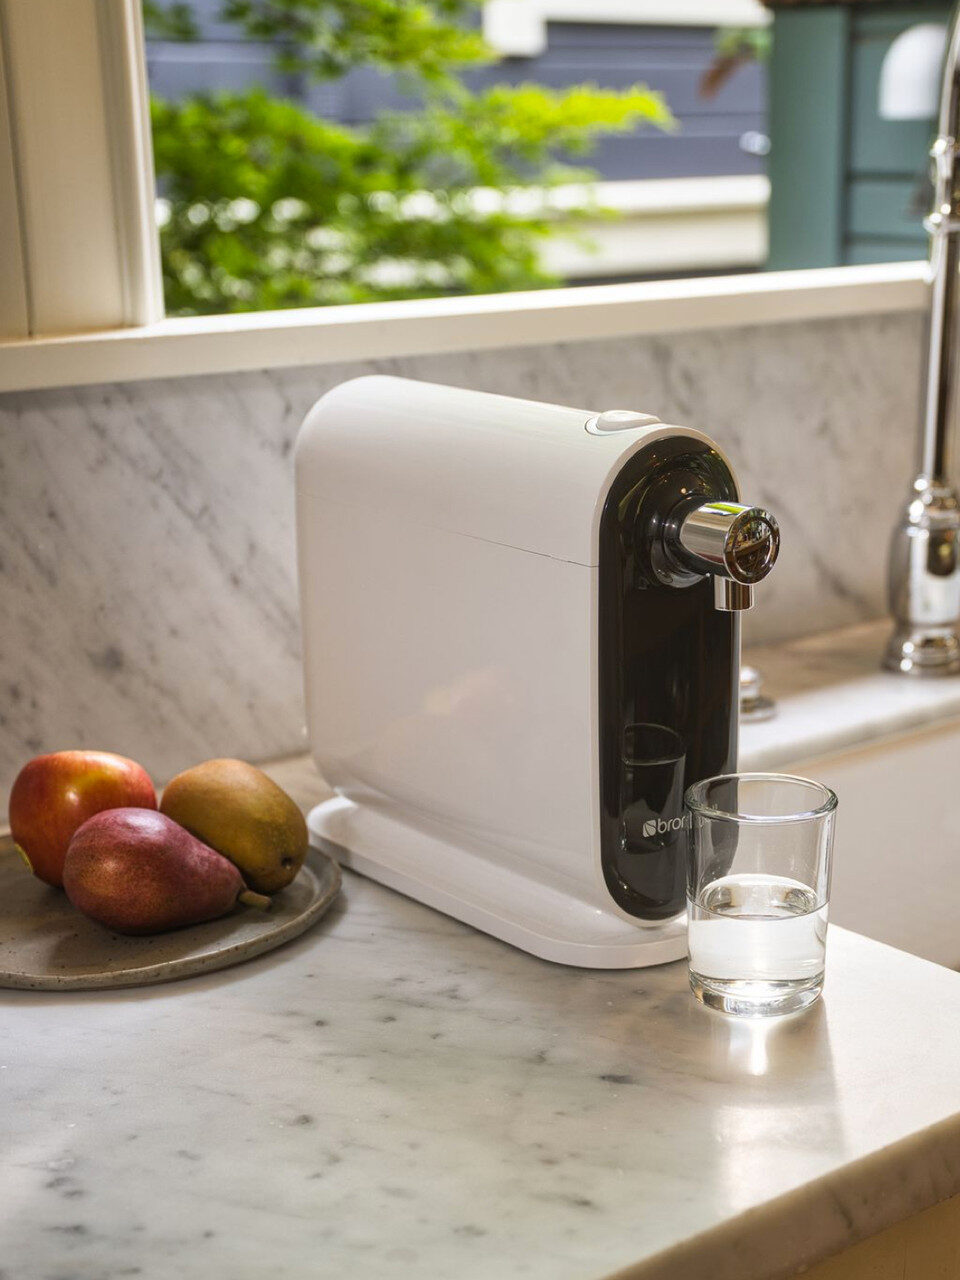 The Brondell Cyprus Three Stage Countertop Water Filtration System set on a kitchen counter with a glass half full of water in front of it.